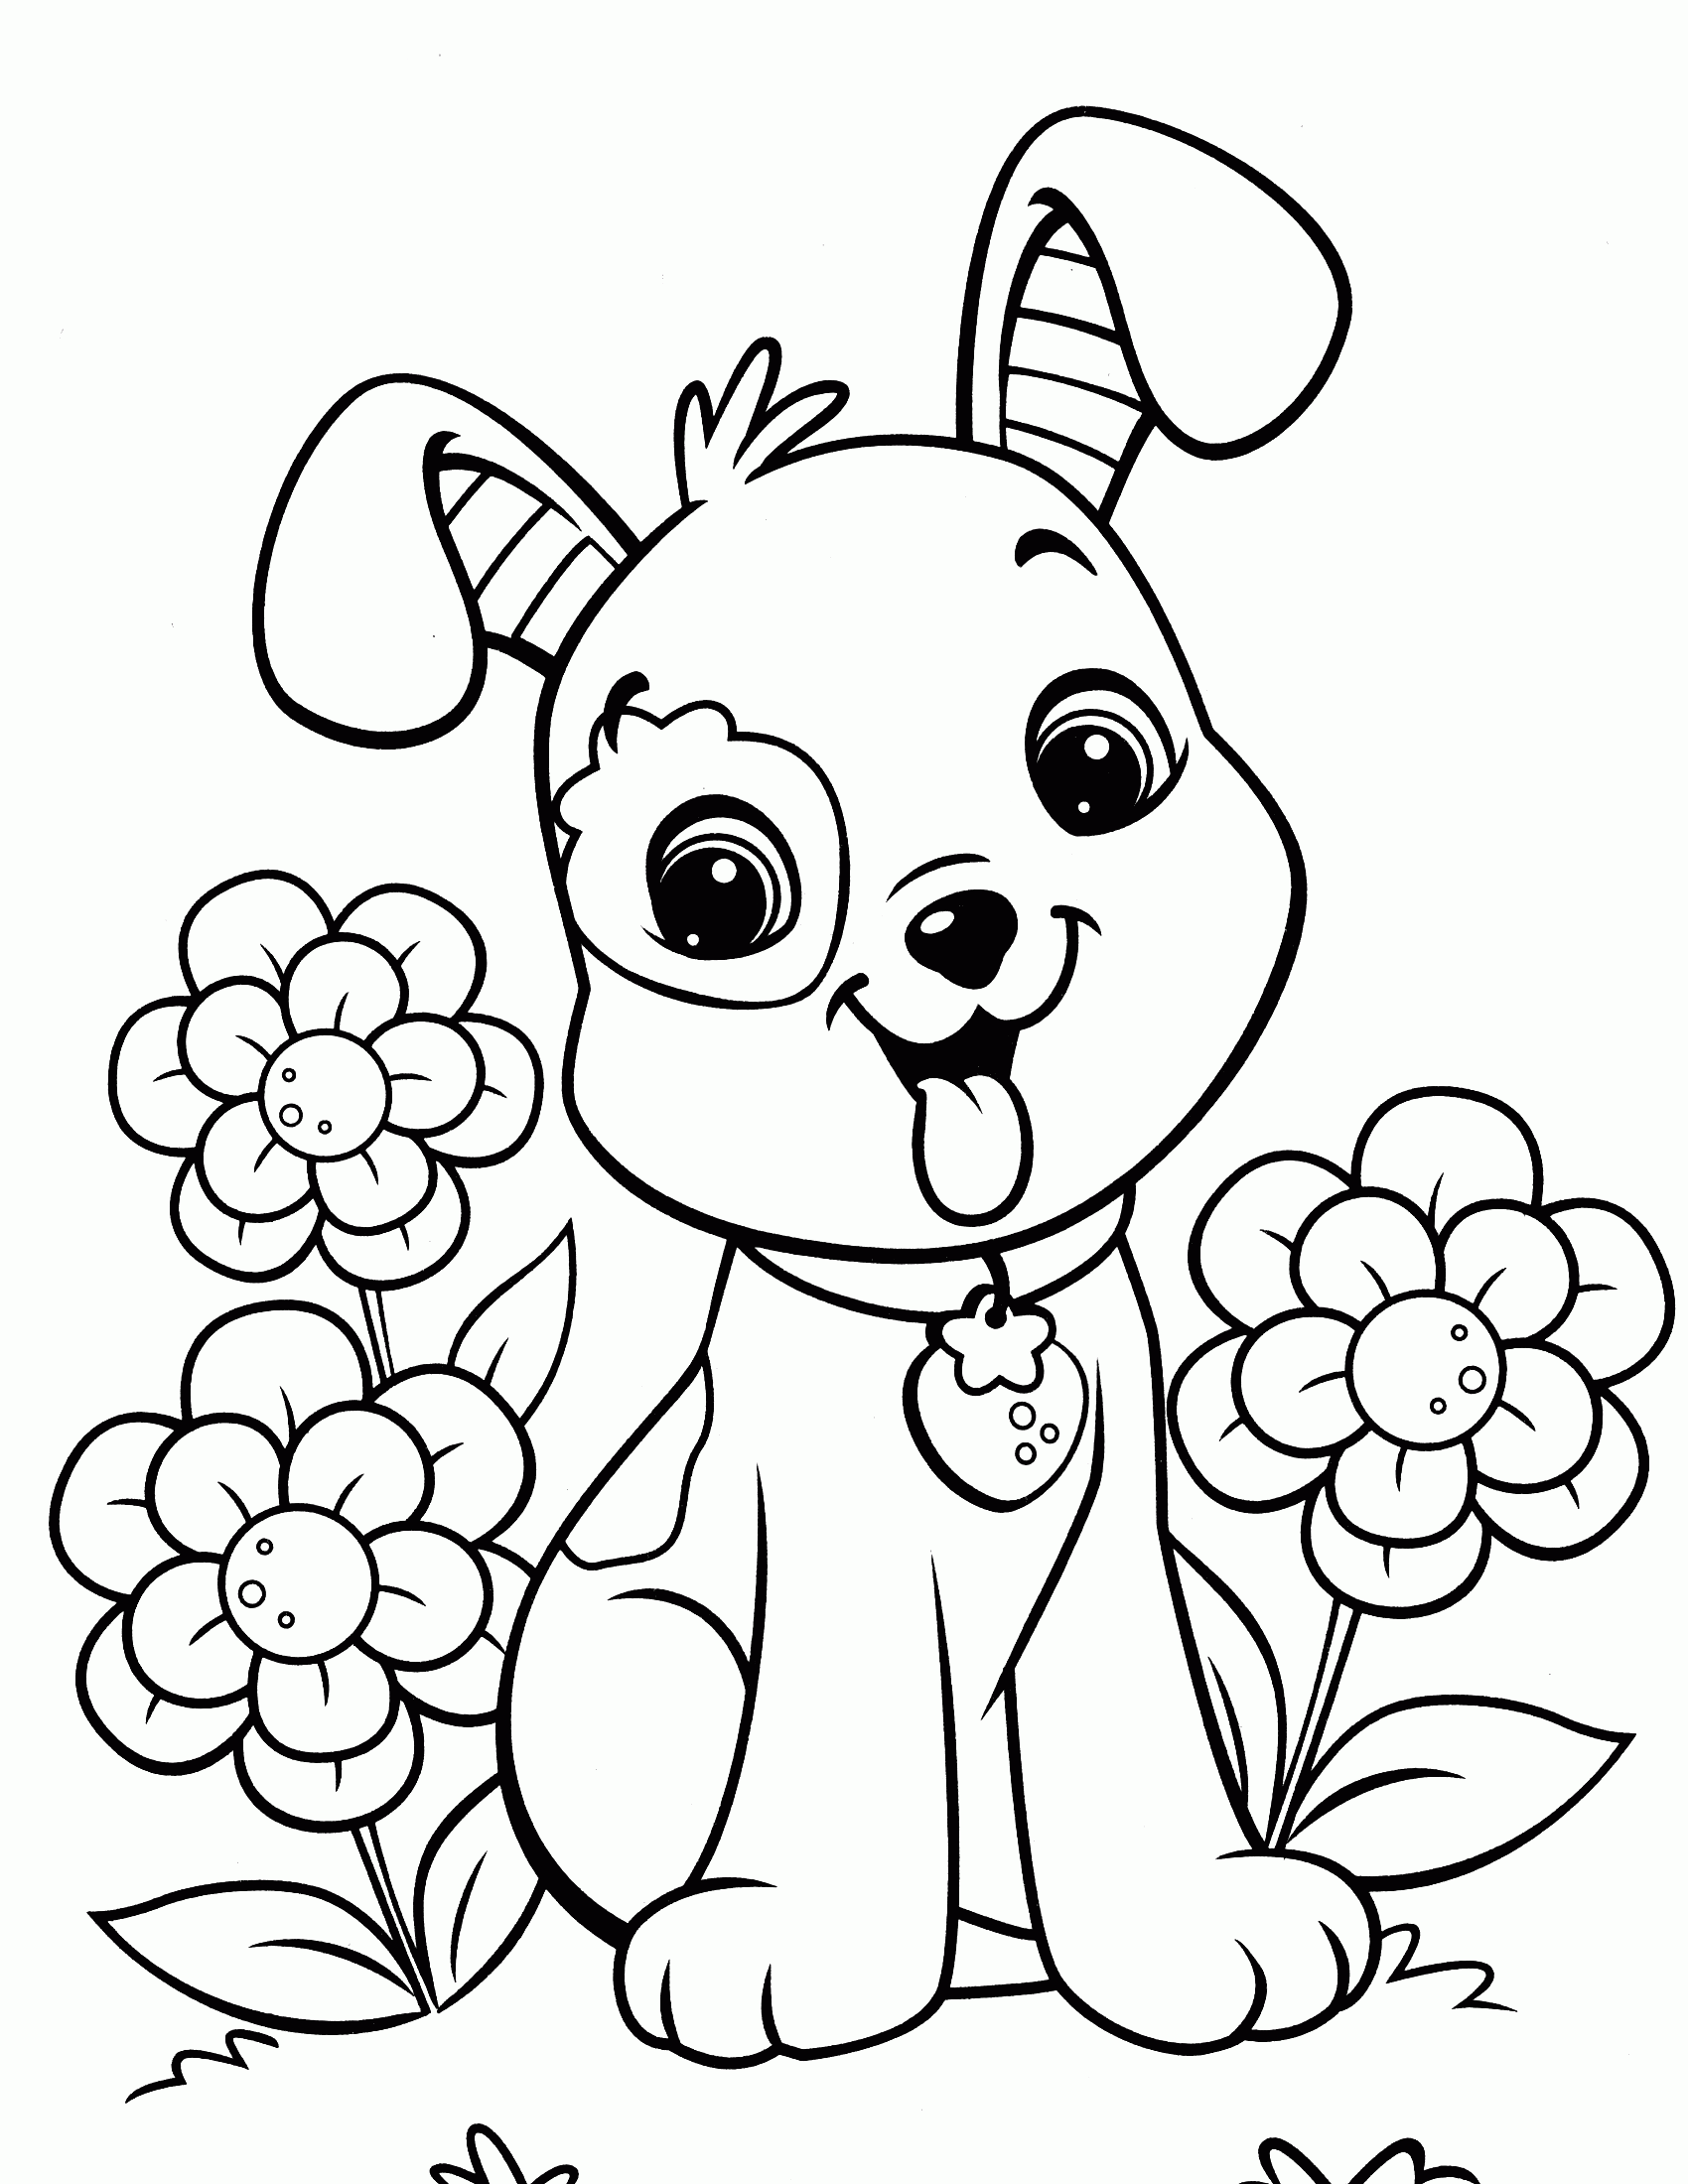 Dog Coloring Pages | fanzdvrlistscom